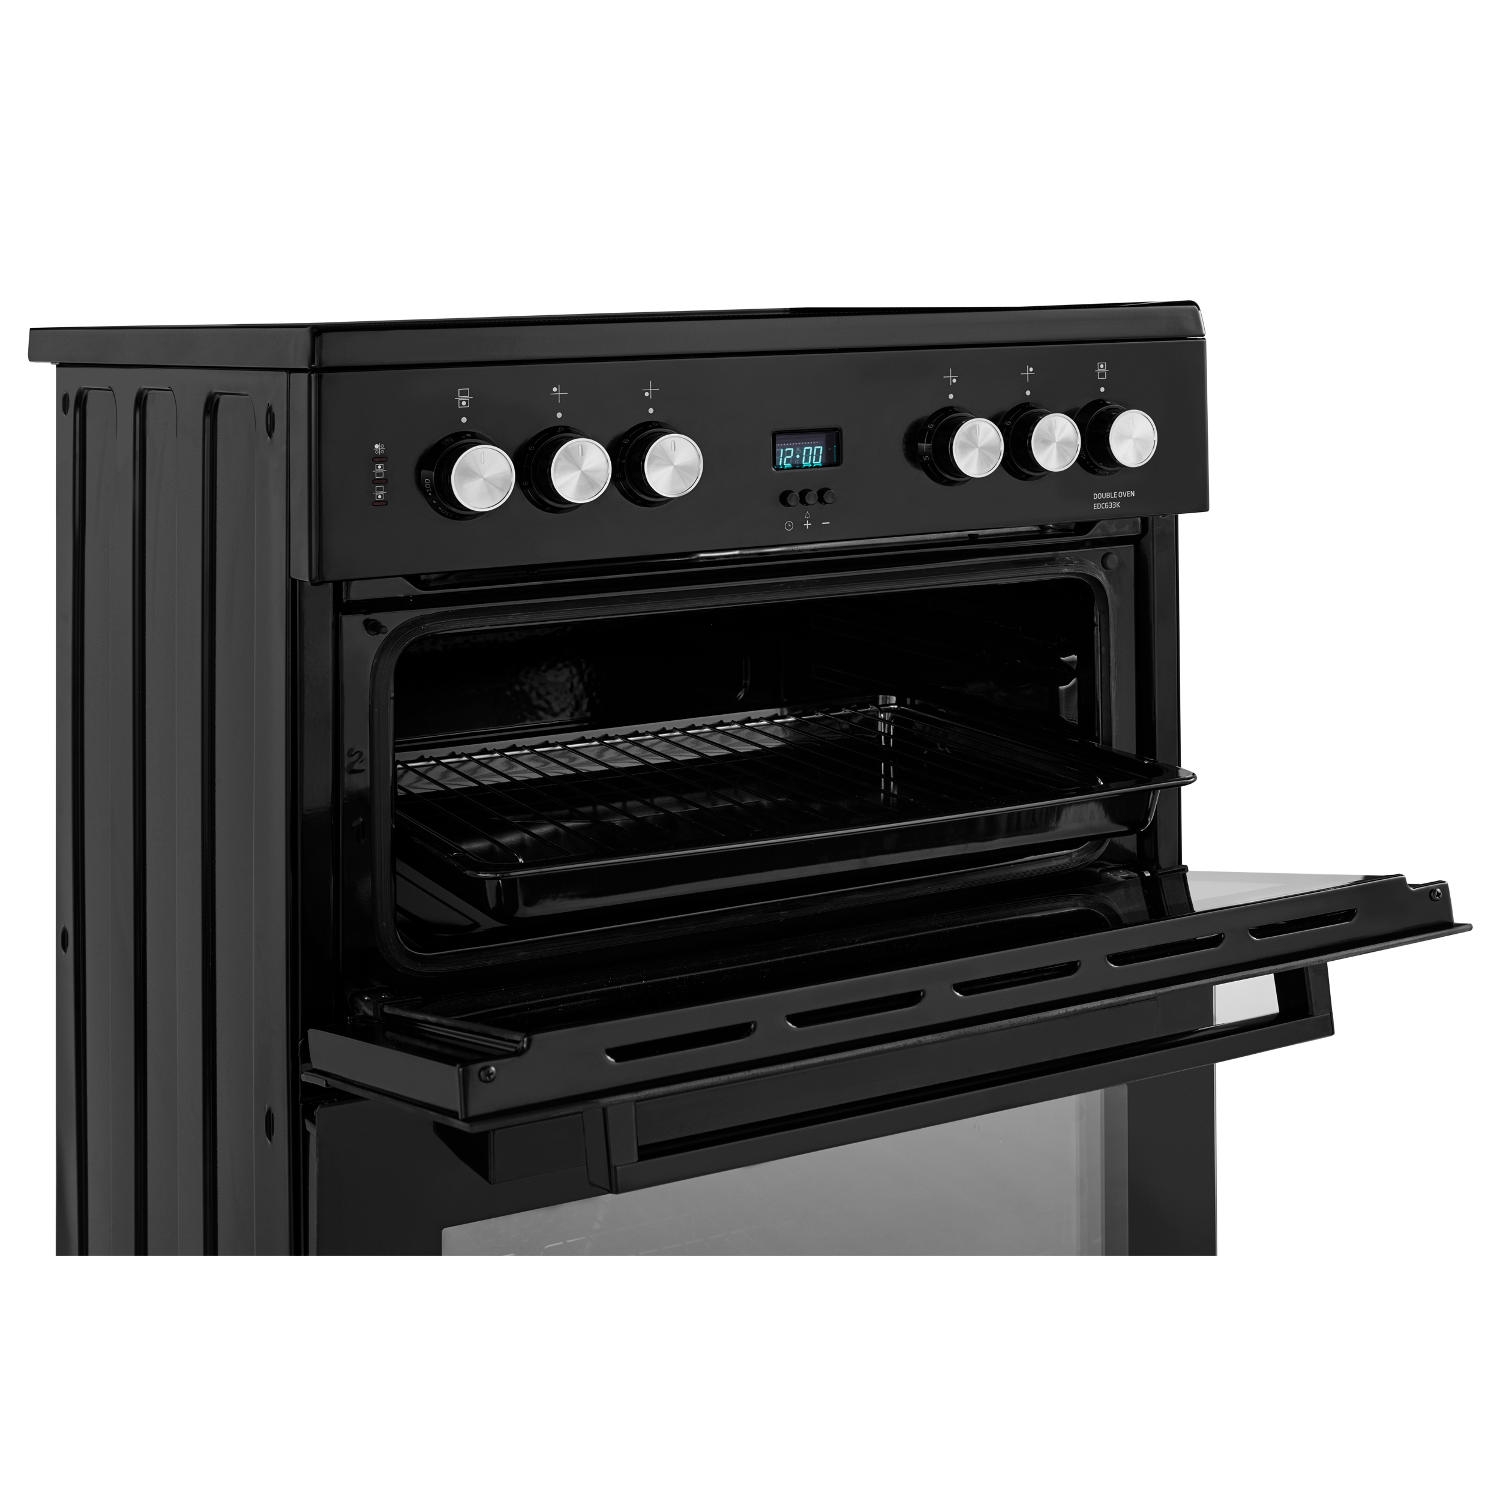  Beko  EDC633K 60cm Double Oven Electric Cooker  with Ceramic 